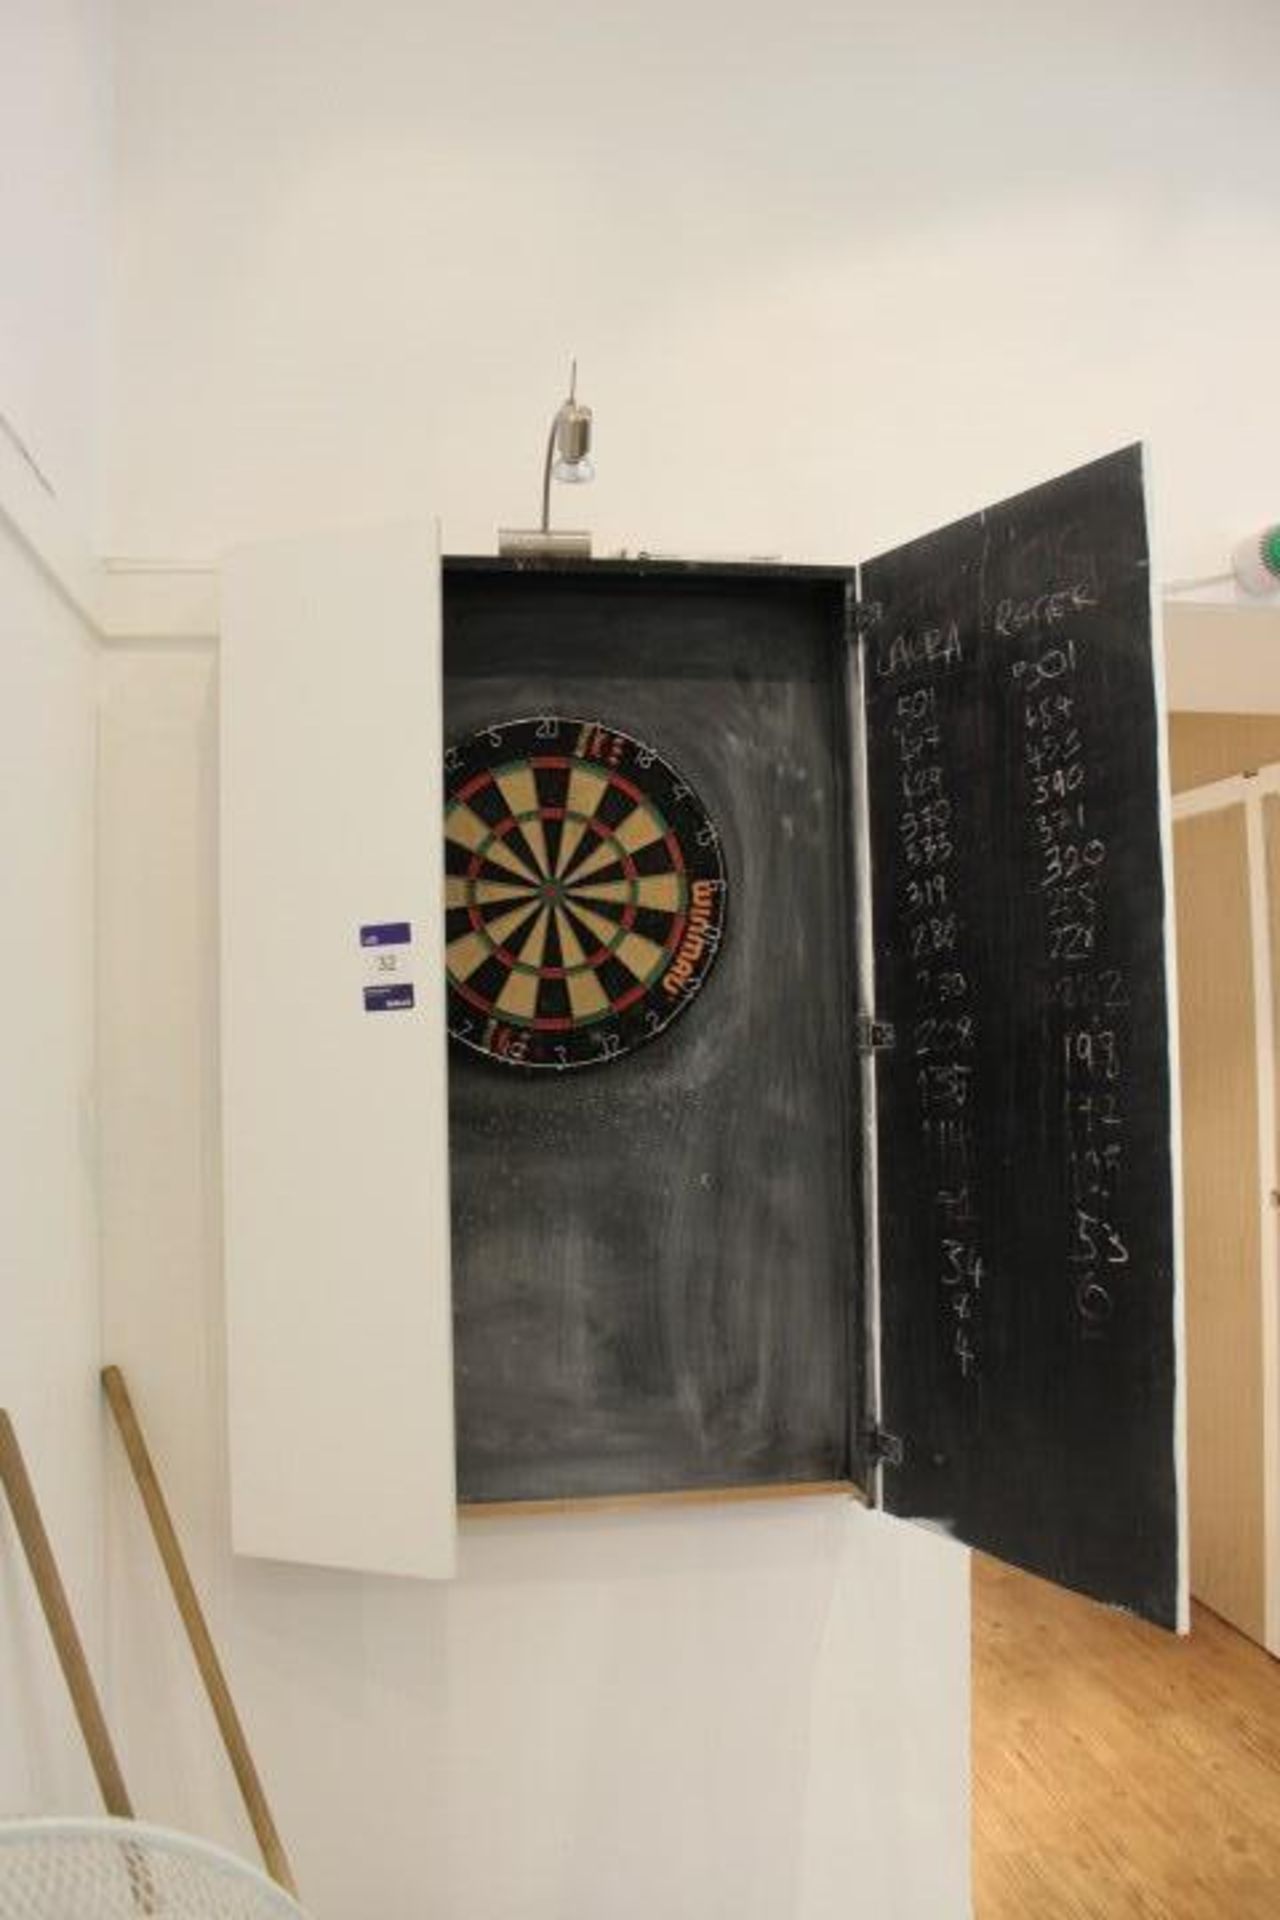 Winmav Masters Dartboard in Wall Mounted Case (Located Dining Area)